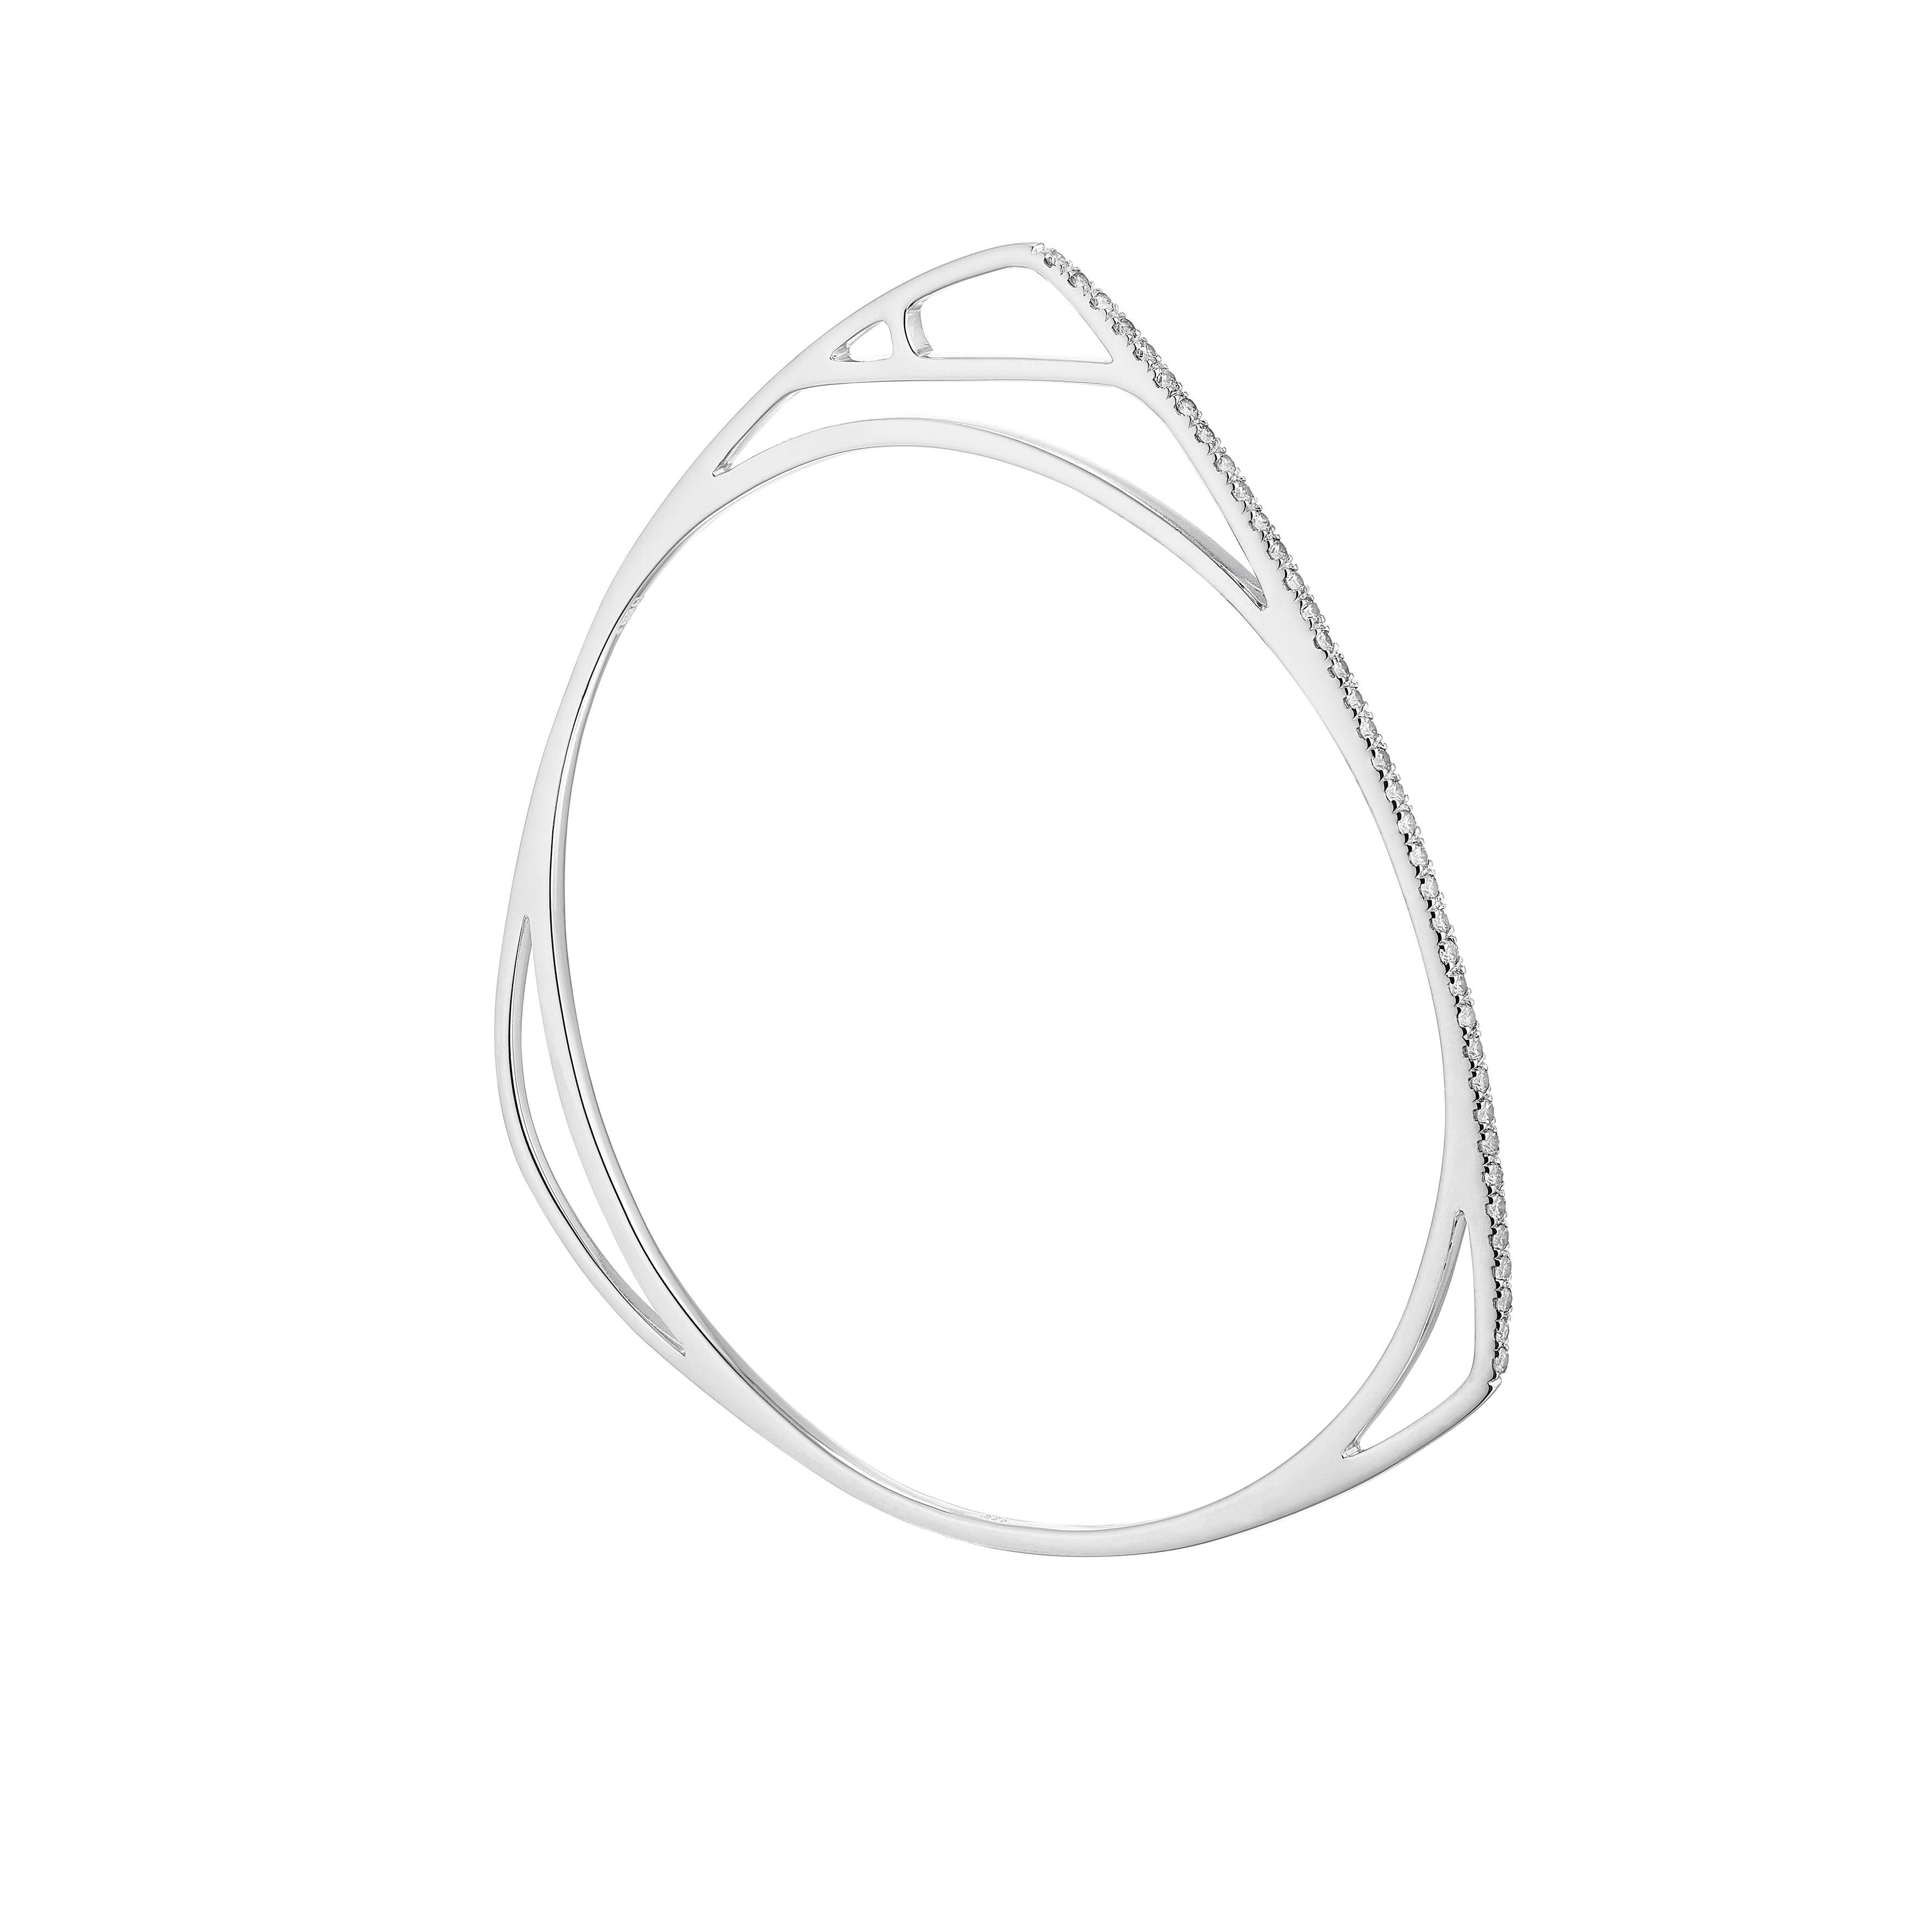 Contemporary Anabela Chan Fine Sustainable Jewelry White Gold Diamond Morpho Bangle 5 Size M For Sale